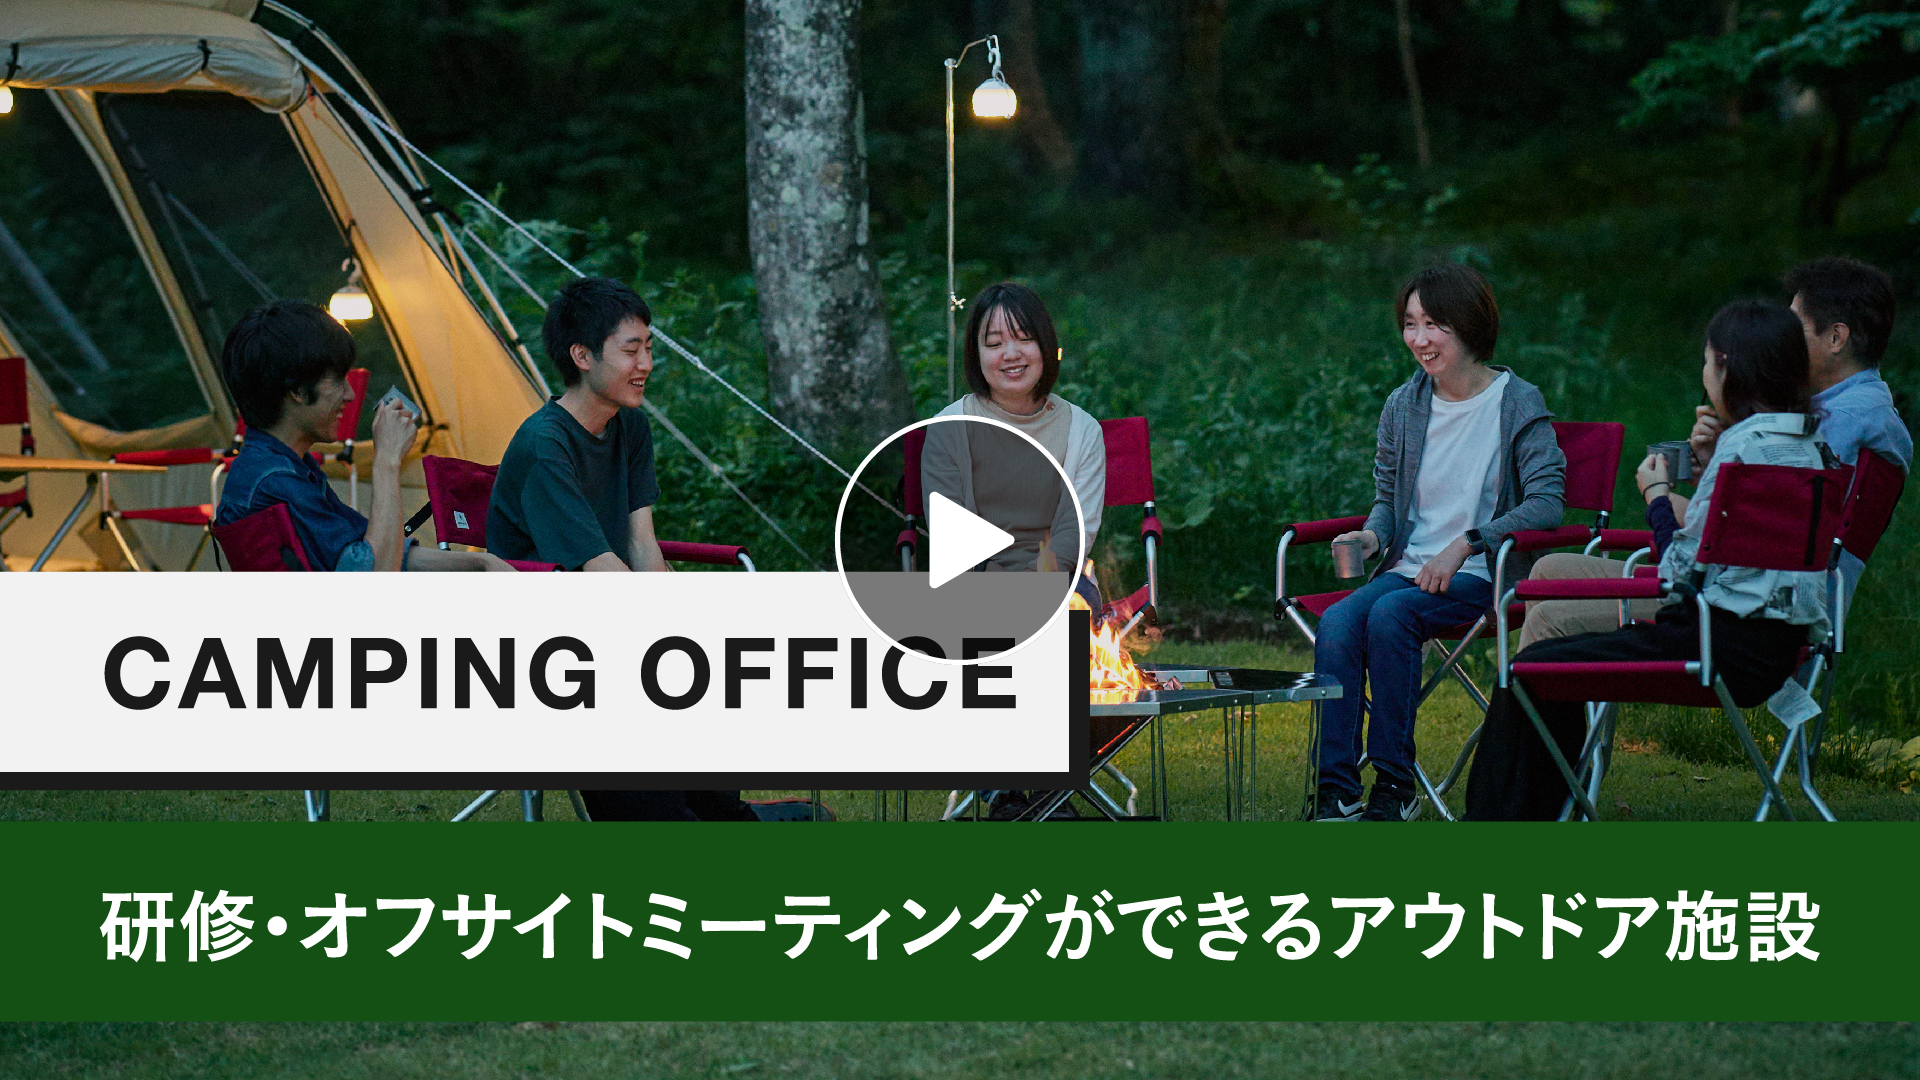 CAMPING OFFICE